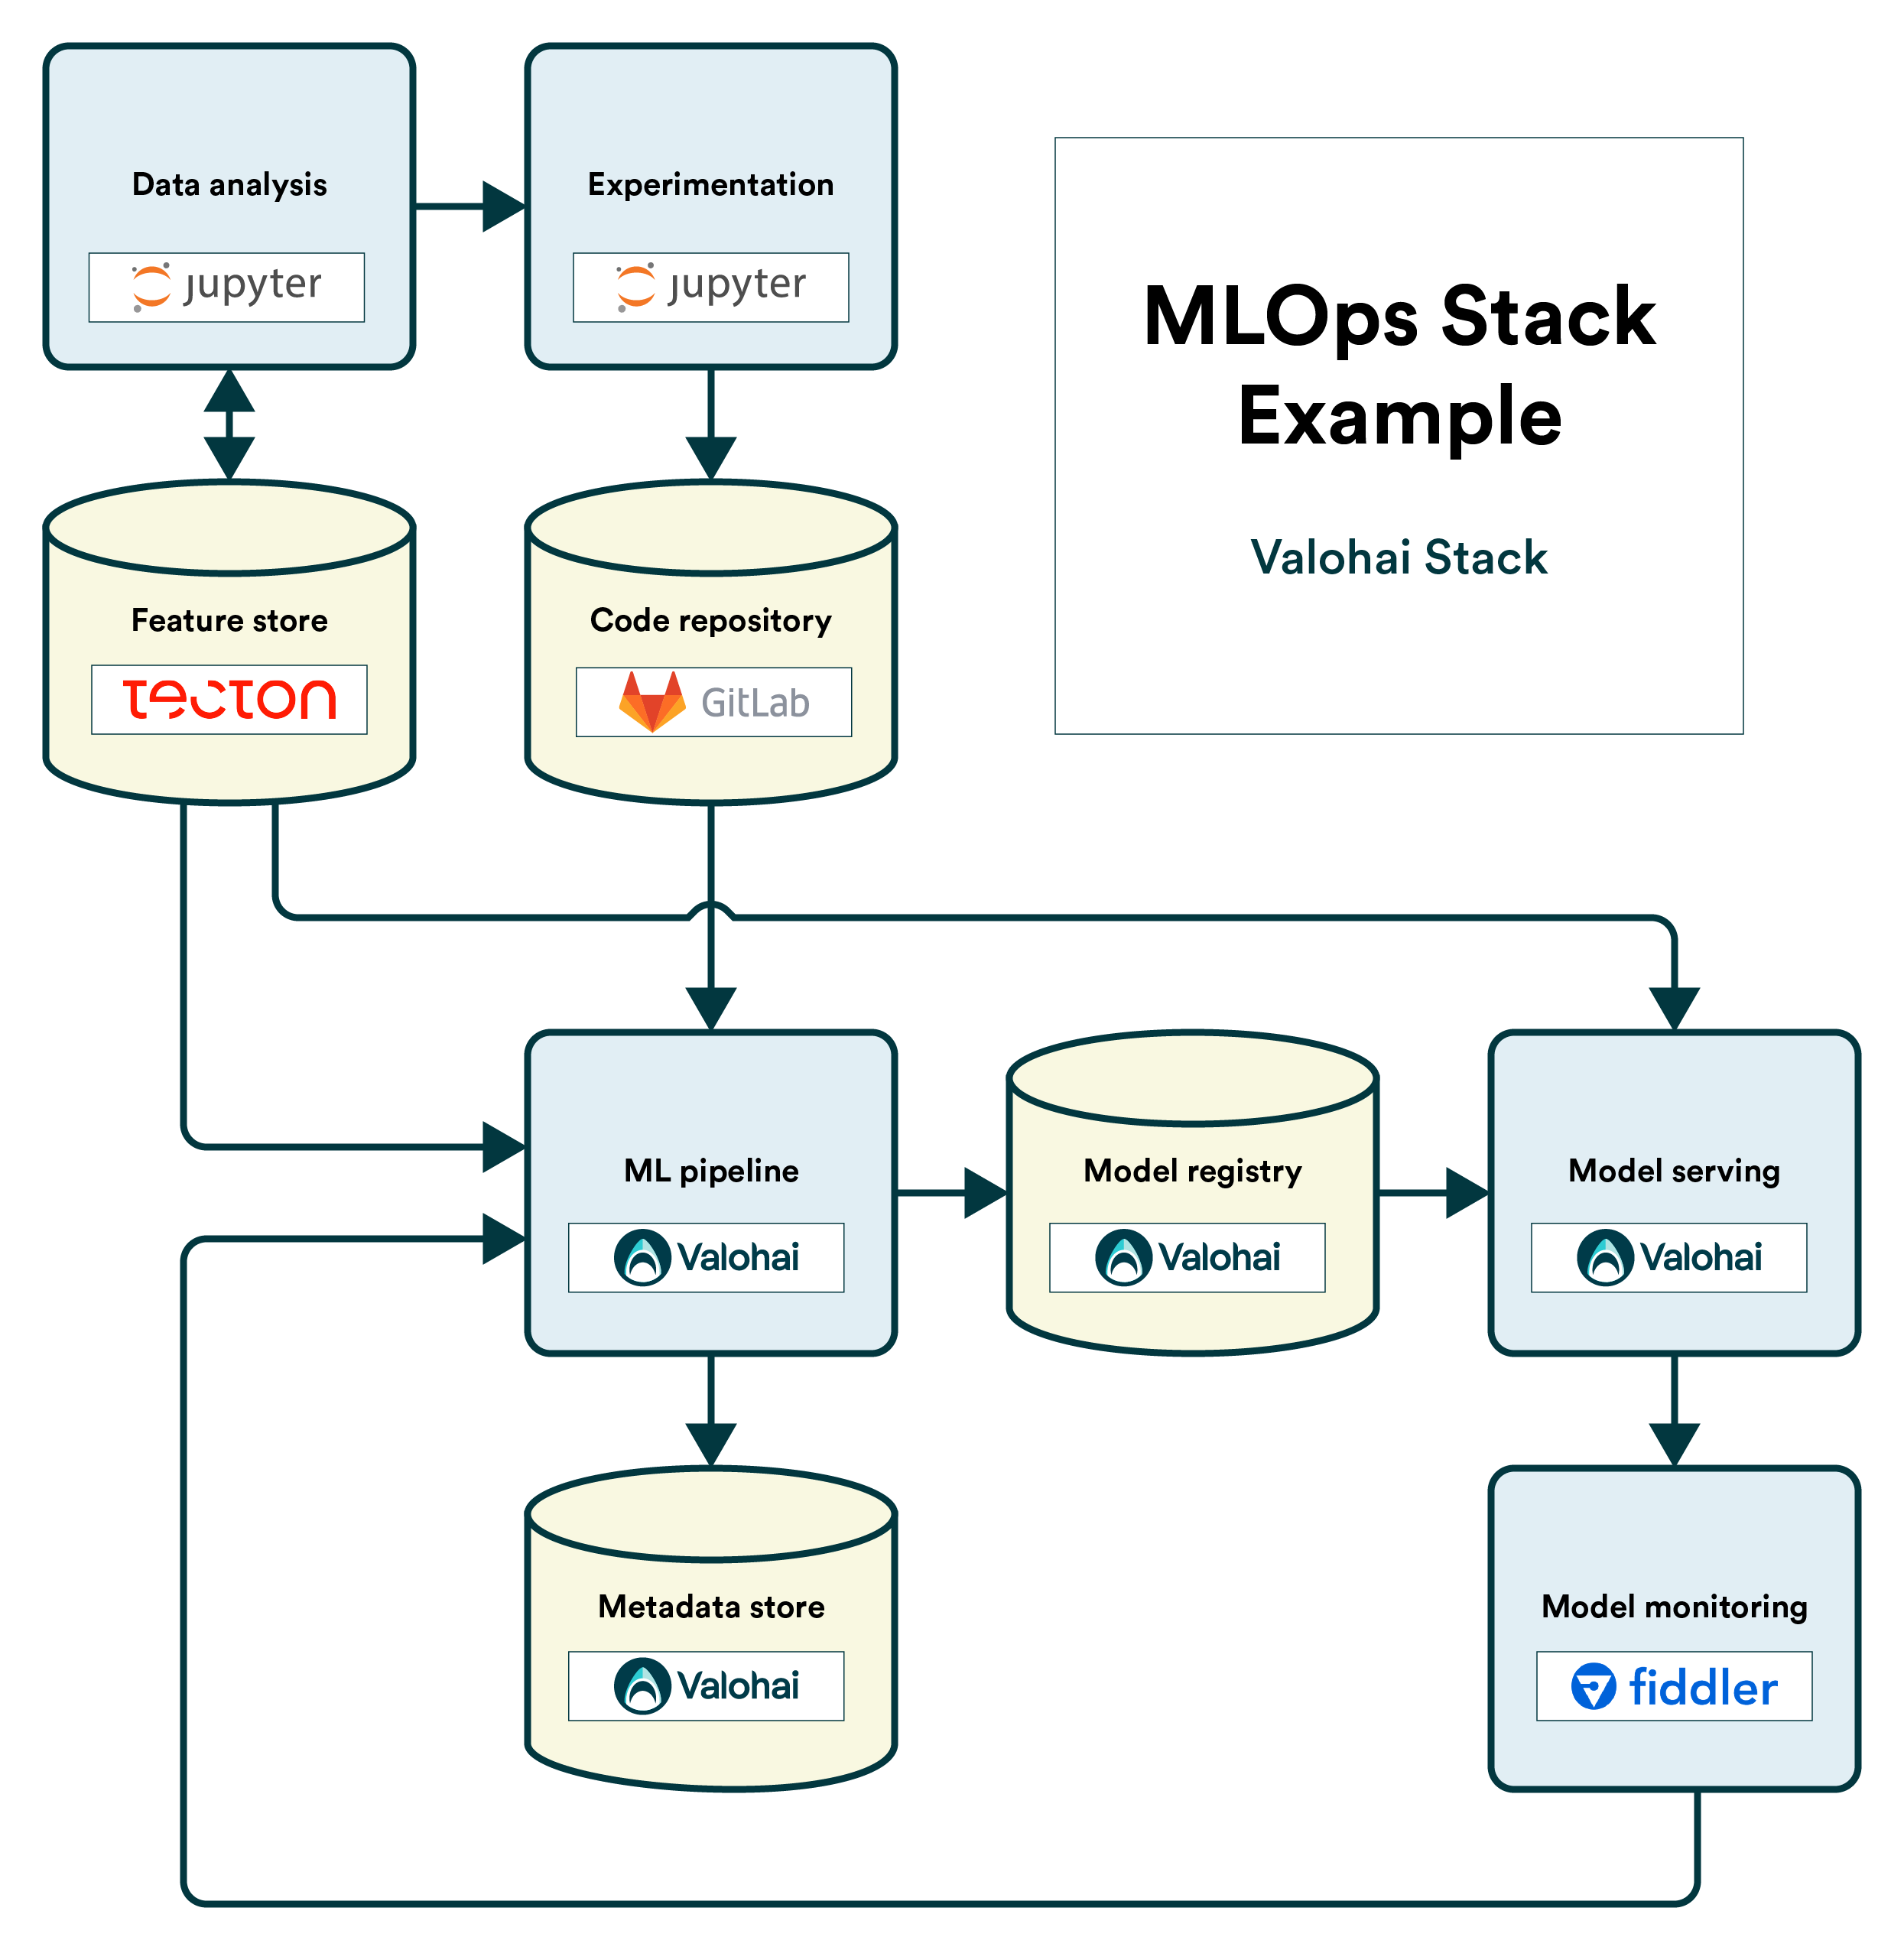 The MLOps Stack Template with Valohai